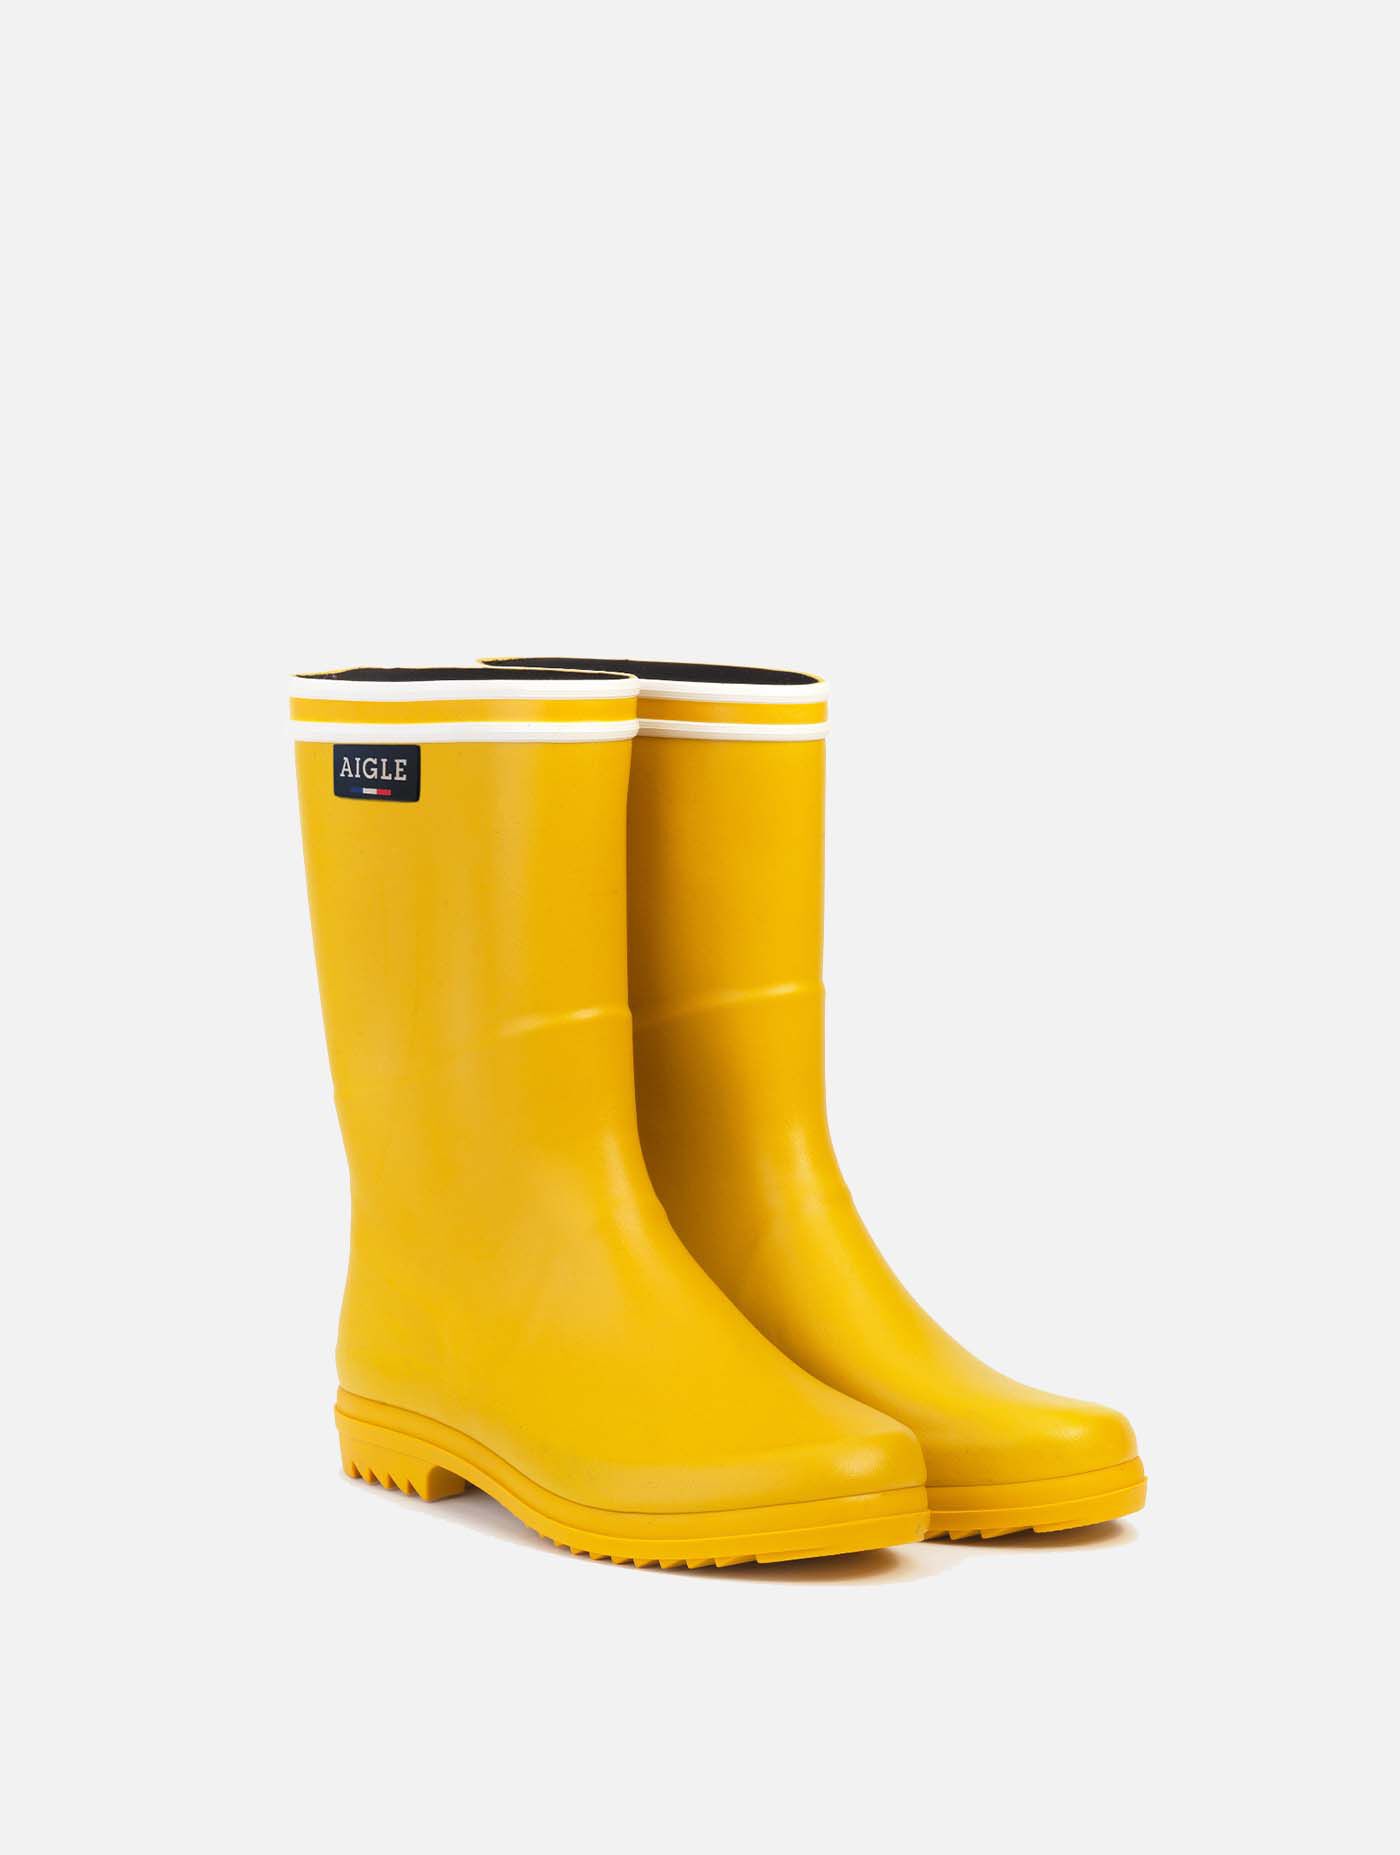 Aigle Goeland Wellington Boots in Yellow for Men Mens Shoes Boots Wellington and rain boots 